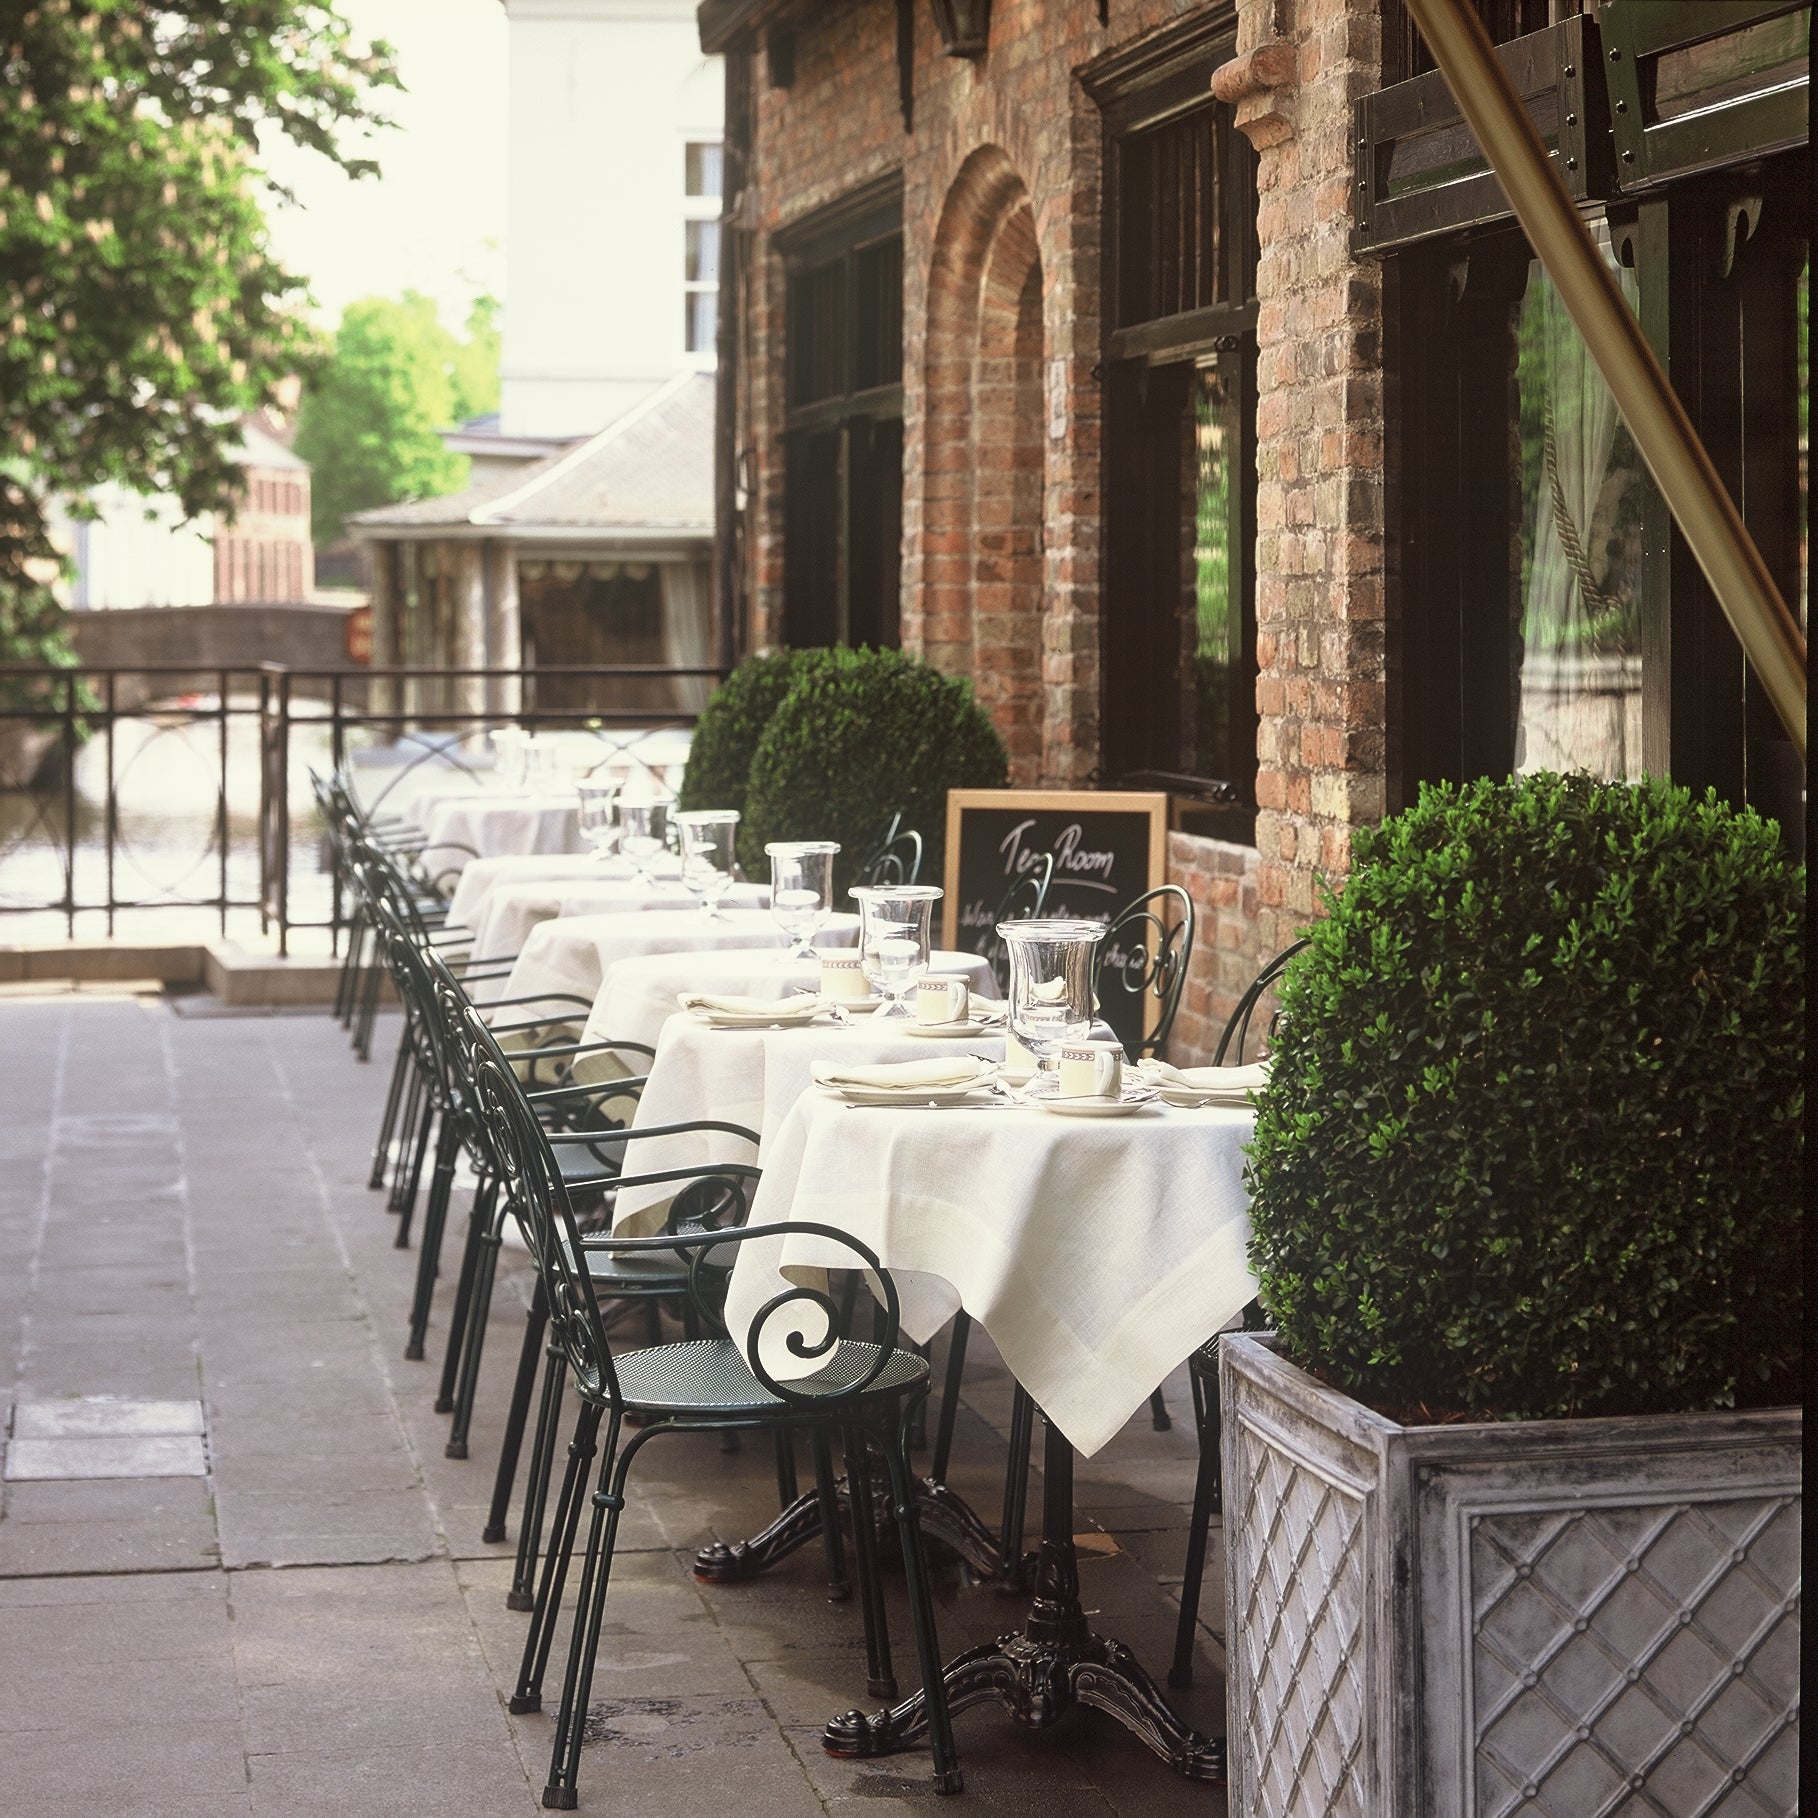 The outside terrace at Relais Bourgondisch Cruyce